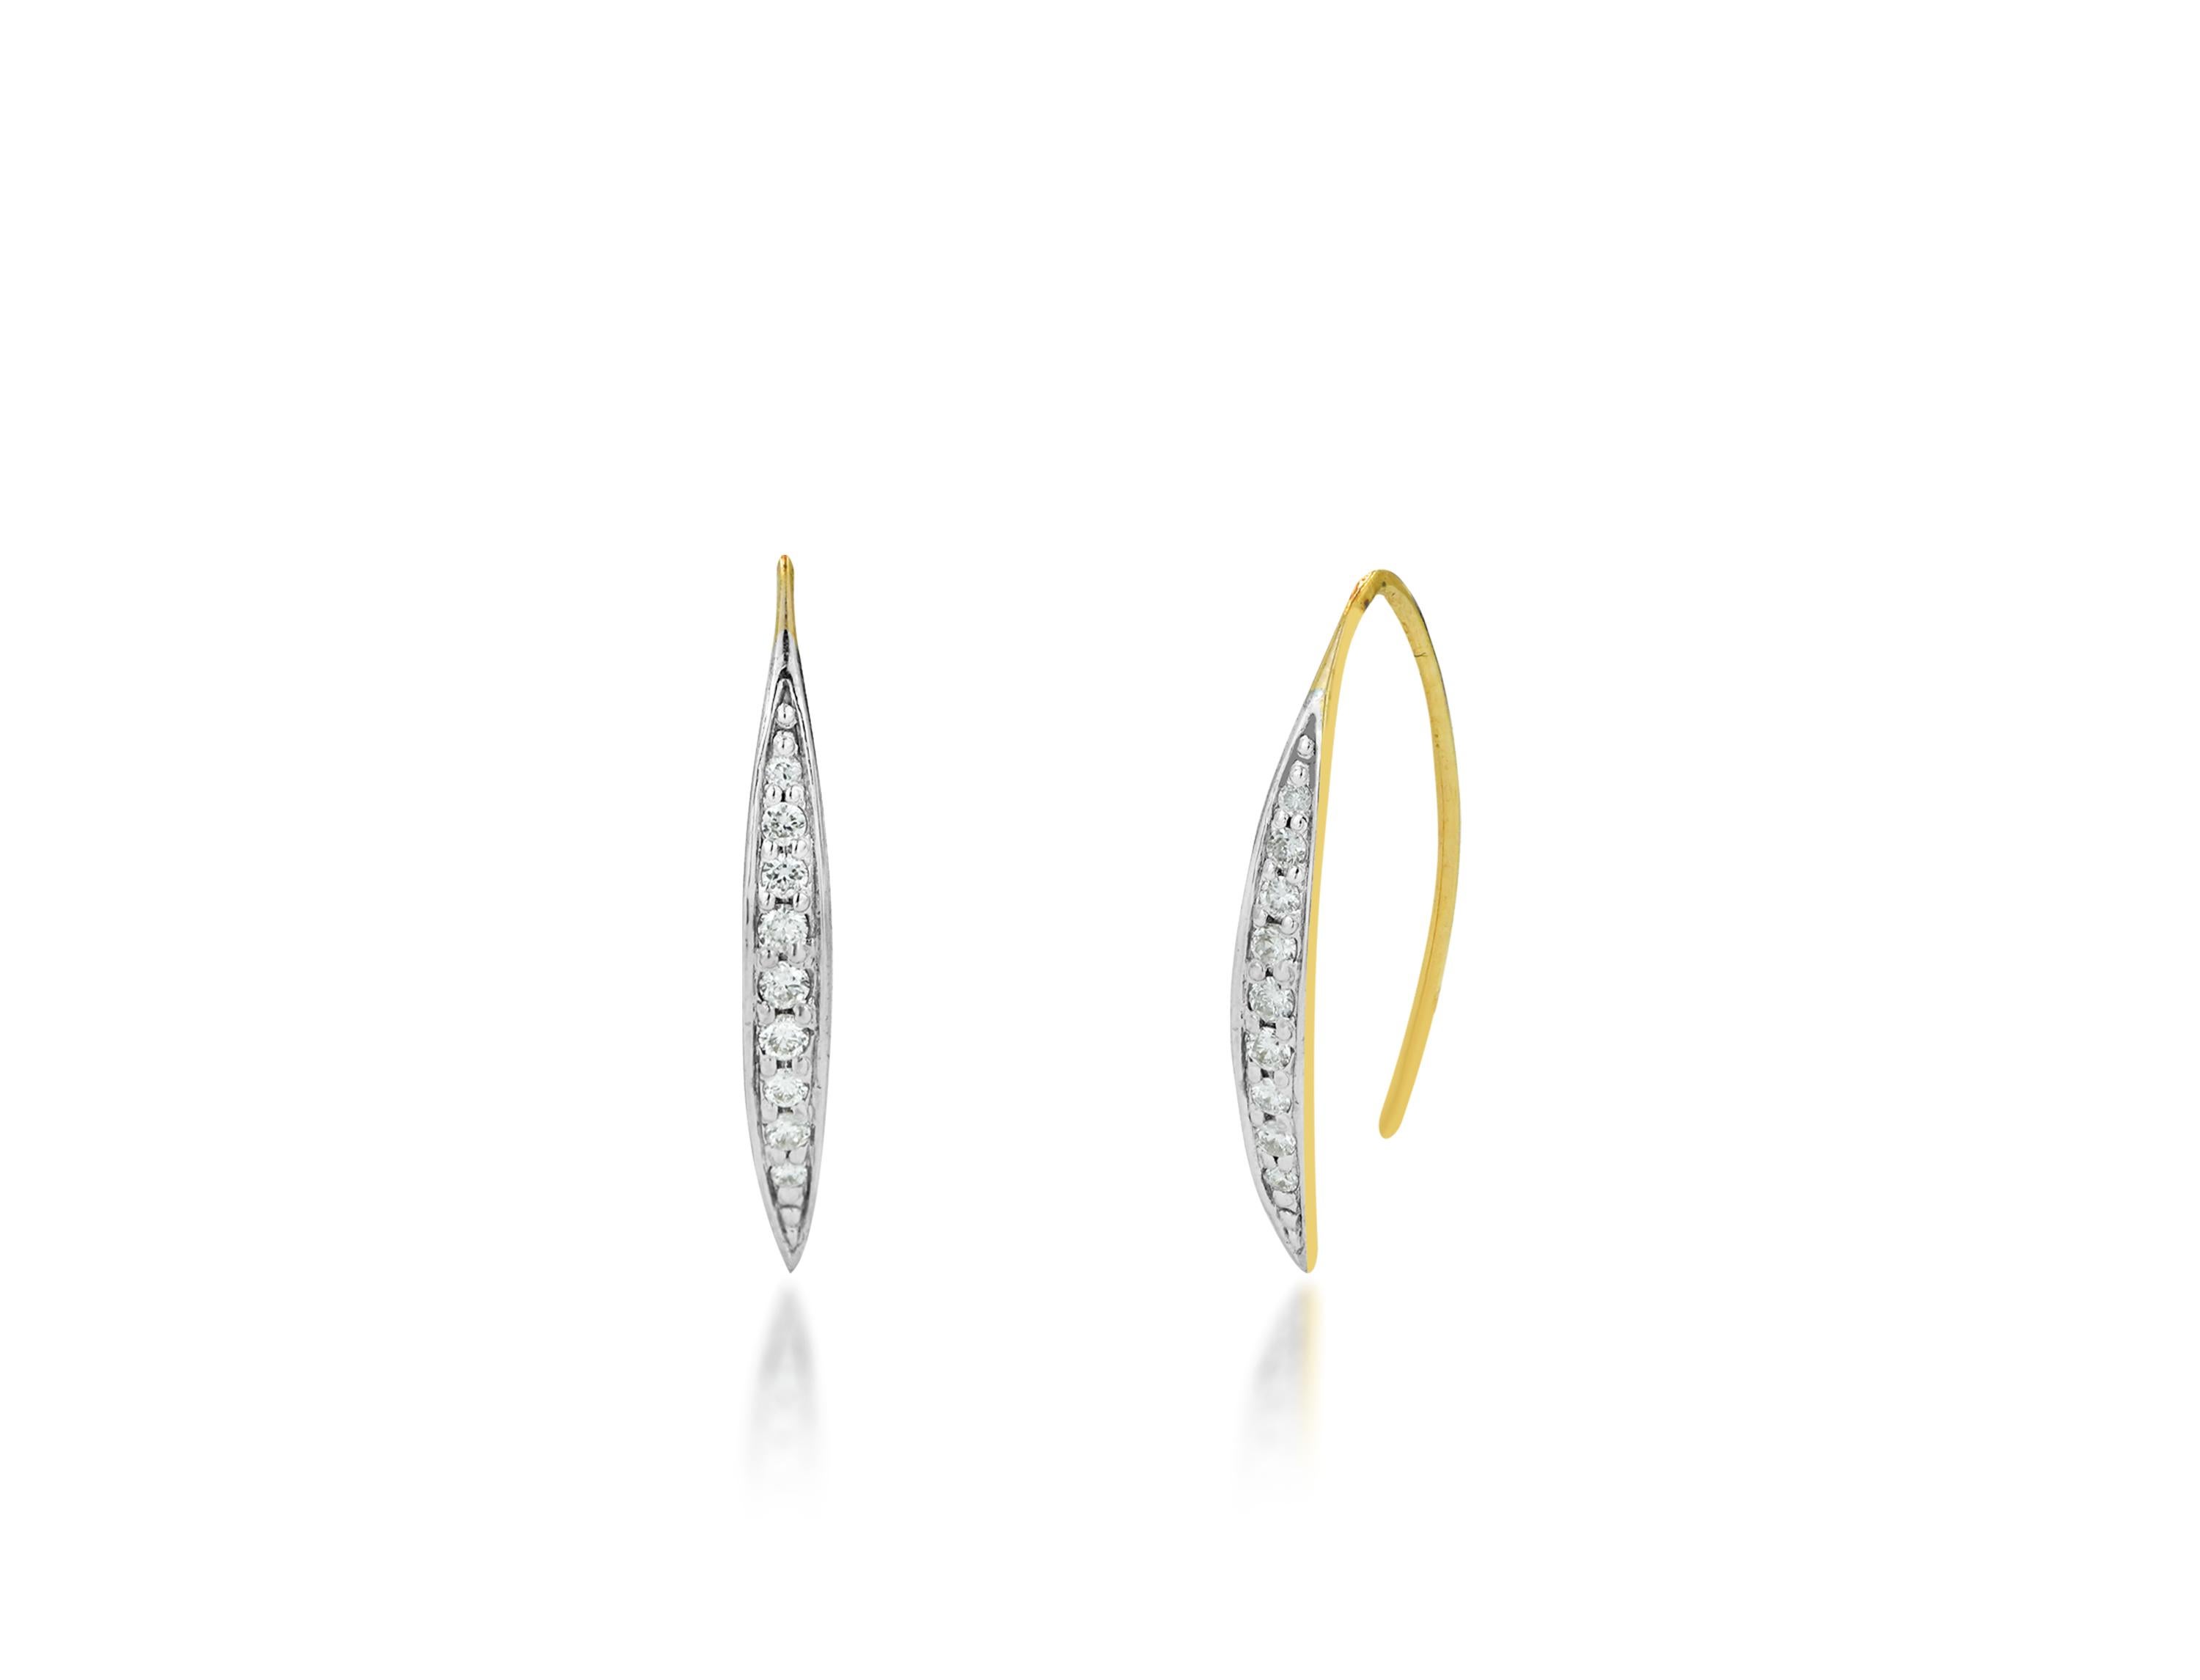 Diamond U Threader Earrings are made of 14k solid gold featuring shiny brilliant round cut natural diamonds.
Available in three colors of gold: White Gold / Rose Gold / Yellow Gold.

Lightweight and gorgeous natural genuine round cut diamond. Each